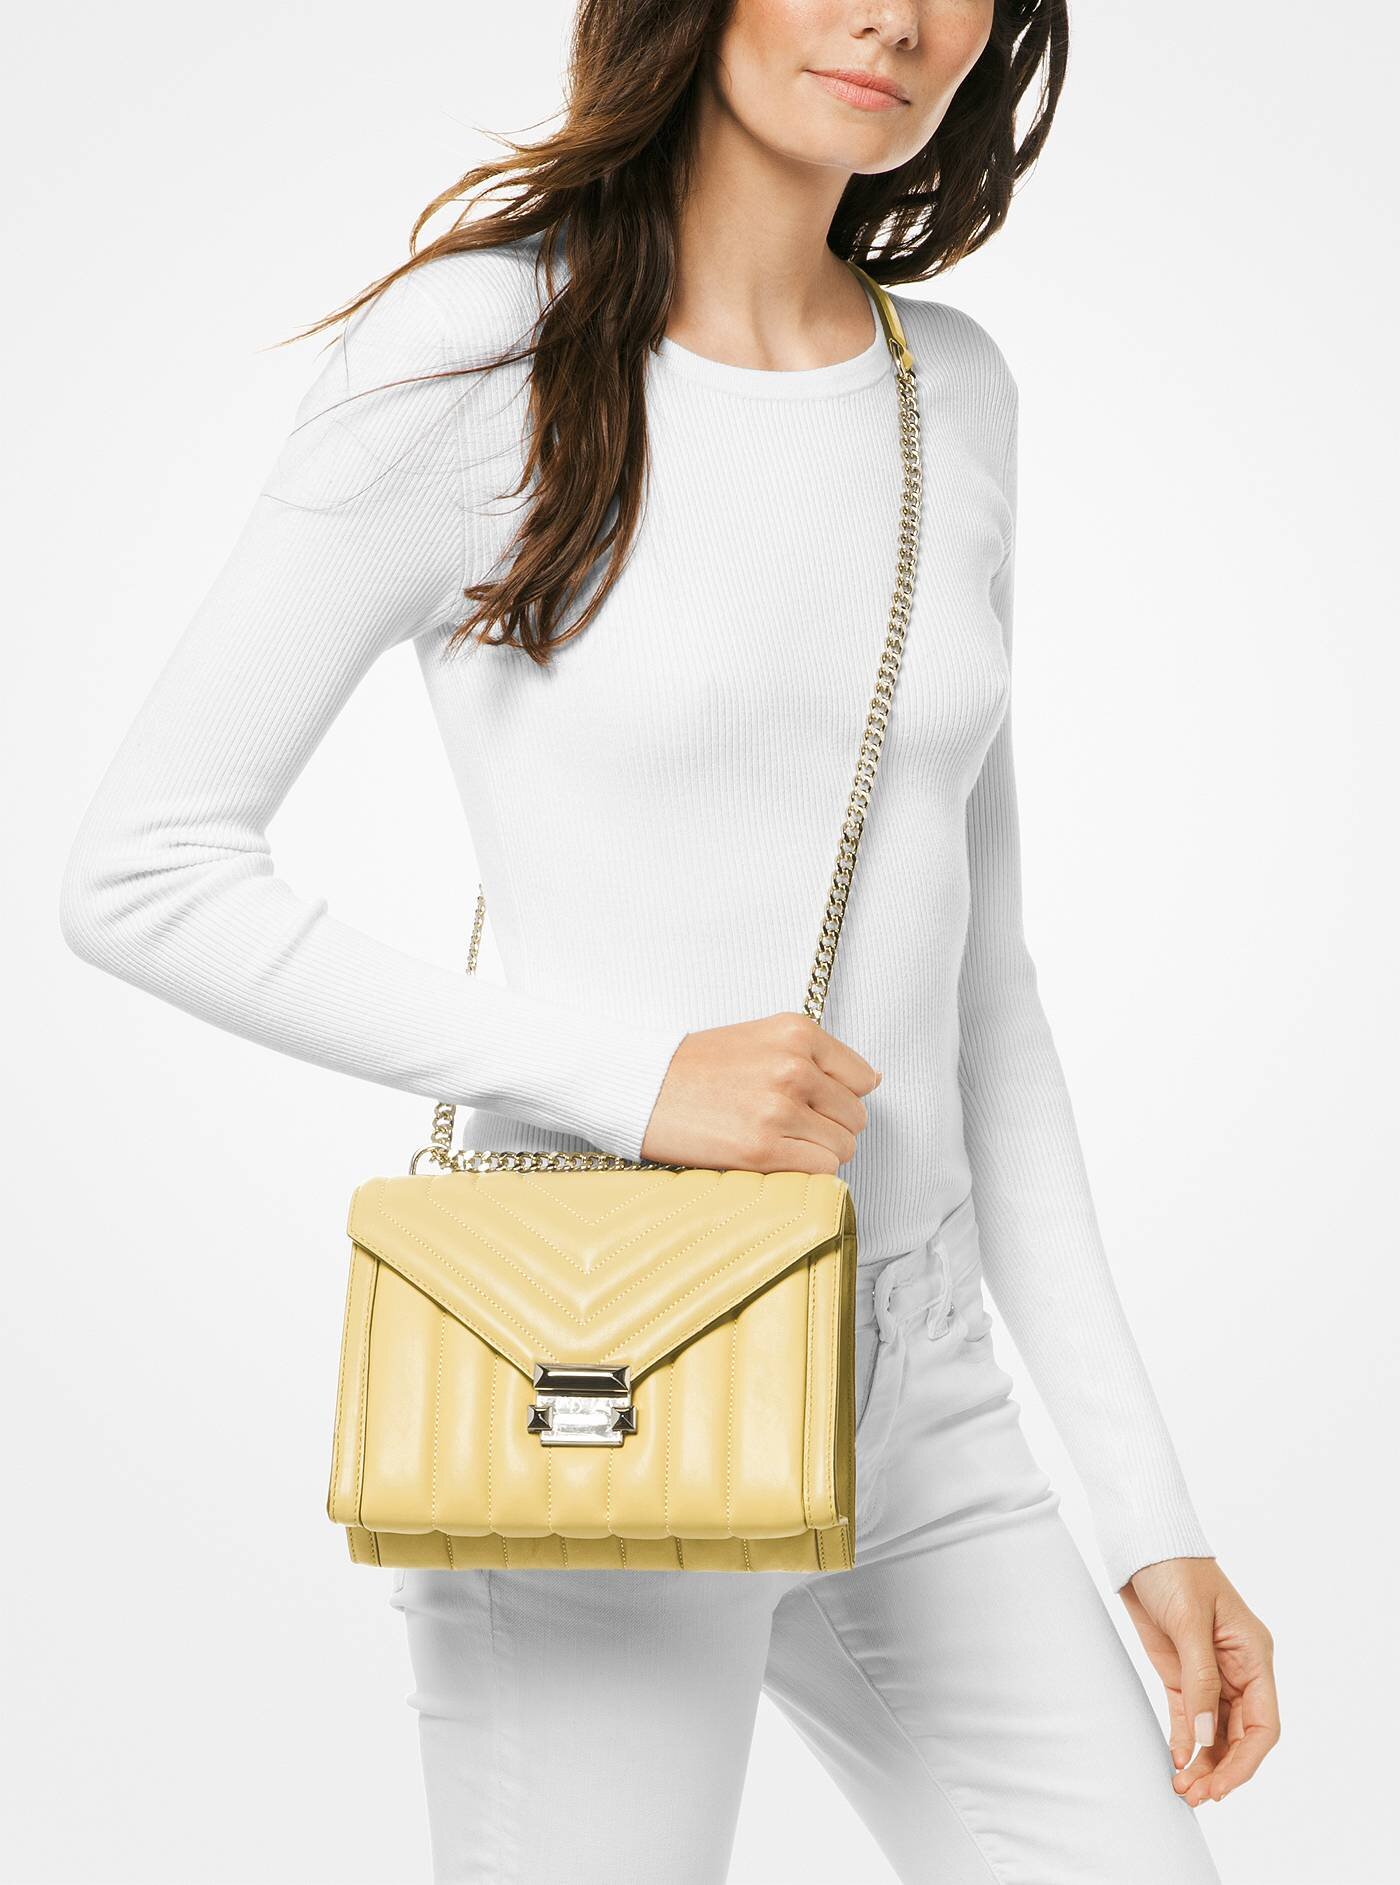 michael kors whitney small leather convertible shoulder bag